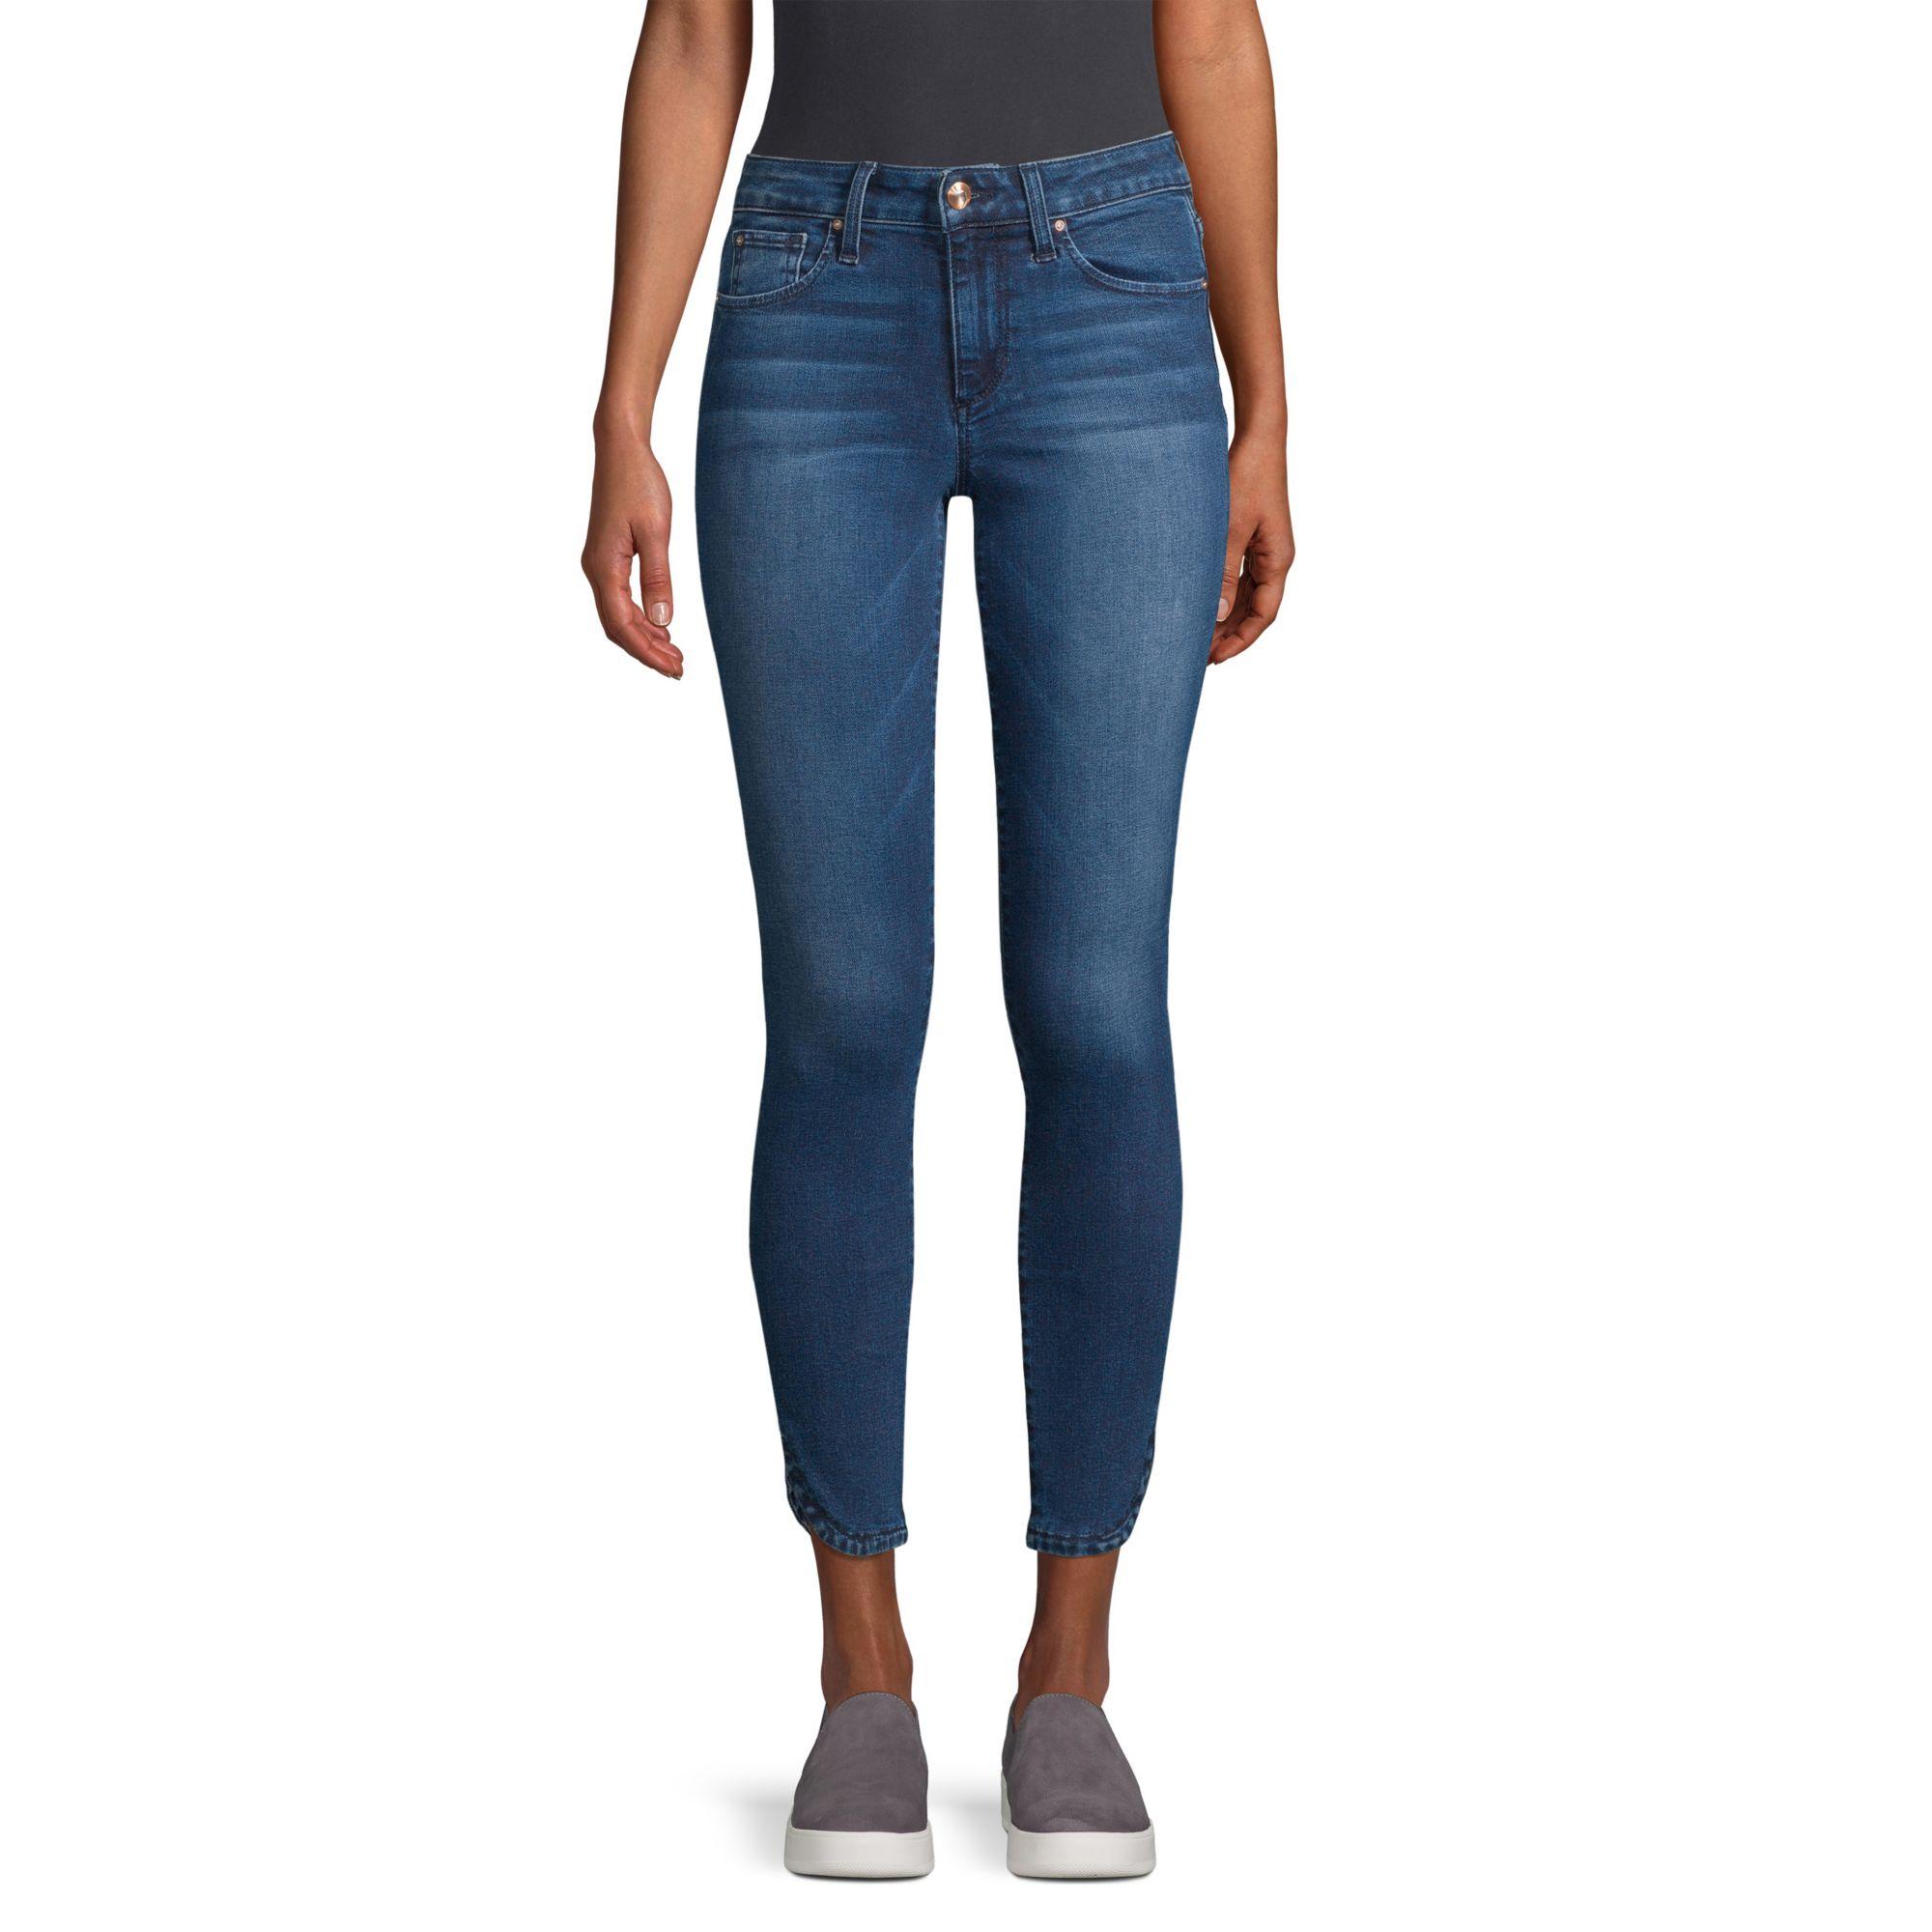 Joe's Jeans Denim The Icon Mid-rise Ankle Skinny Jeans in Blue - Lyst